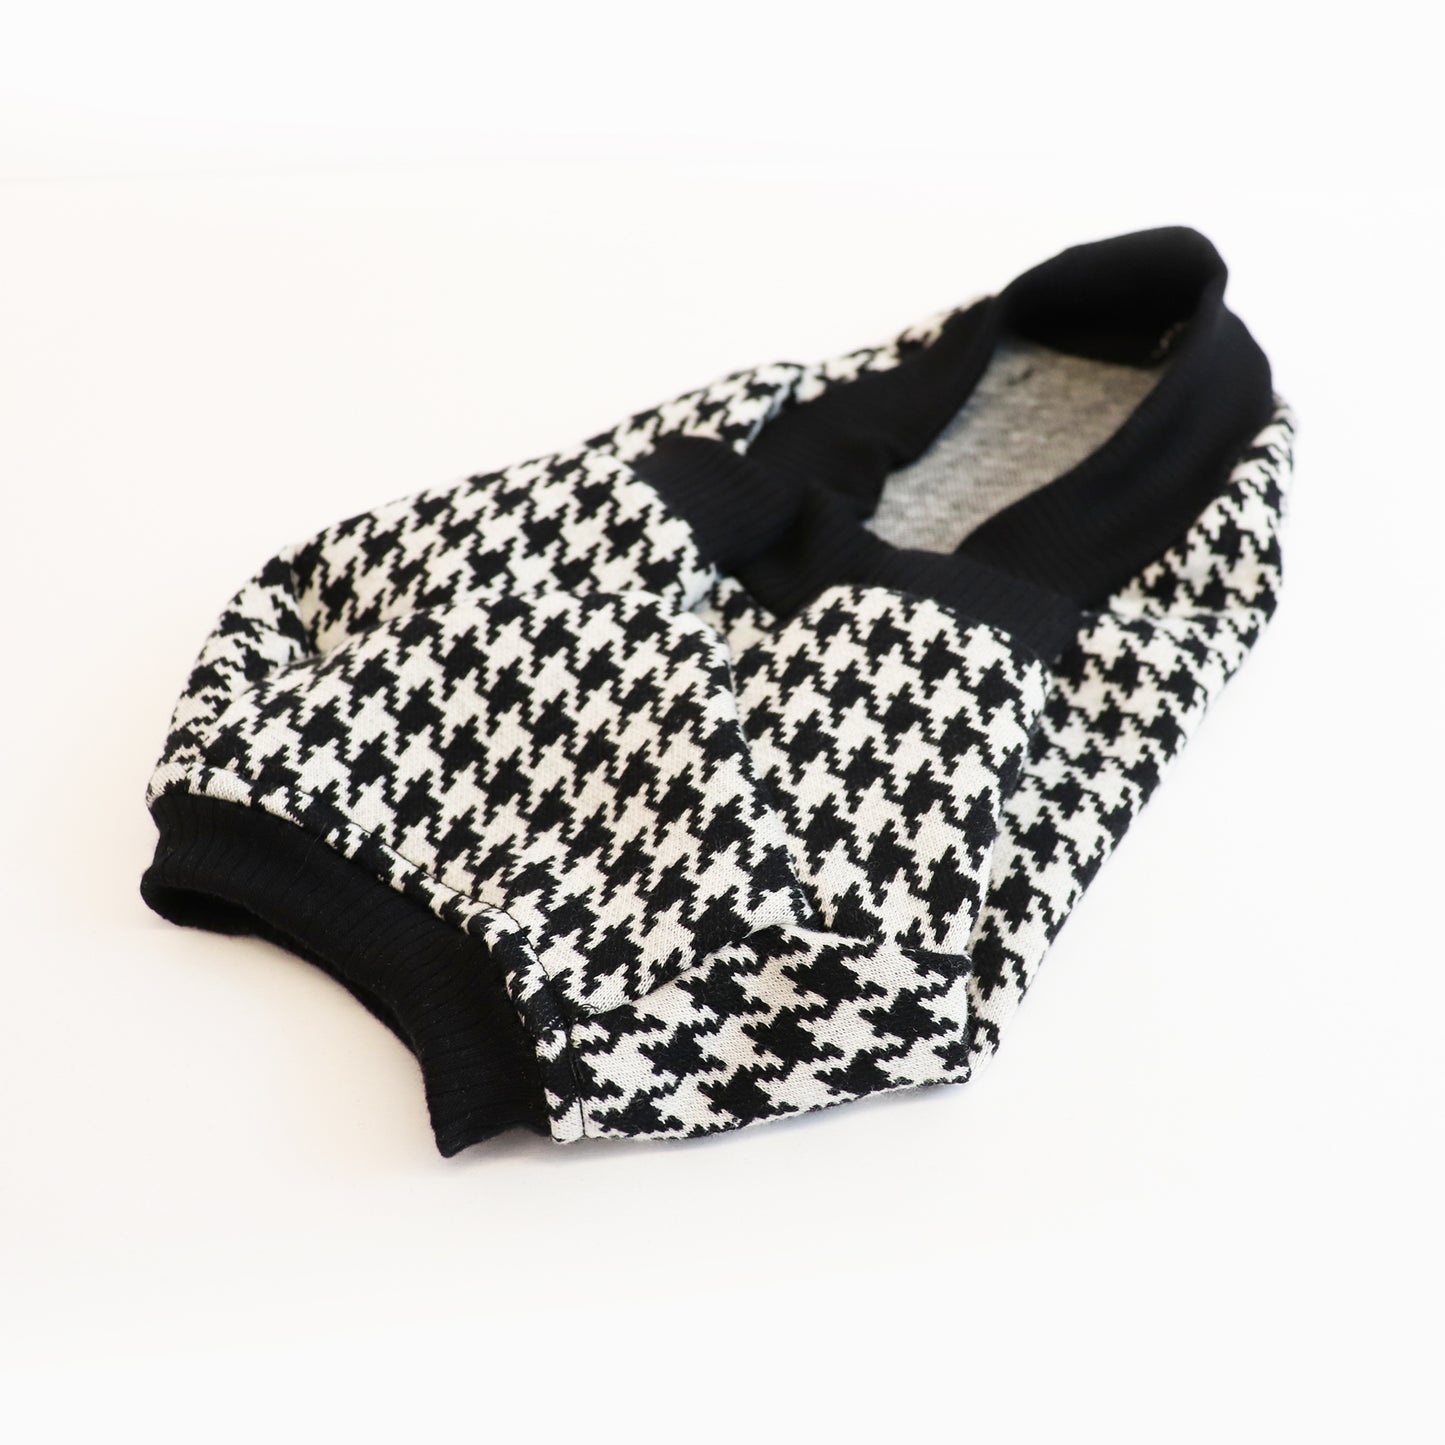 Houndstooth Sweater Top - Black